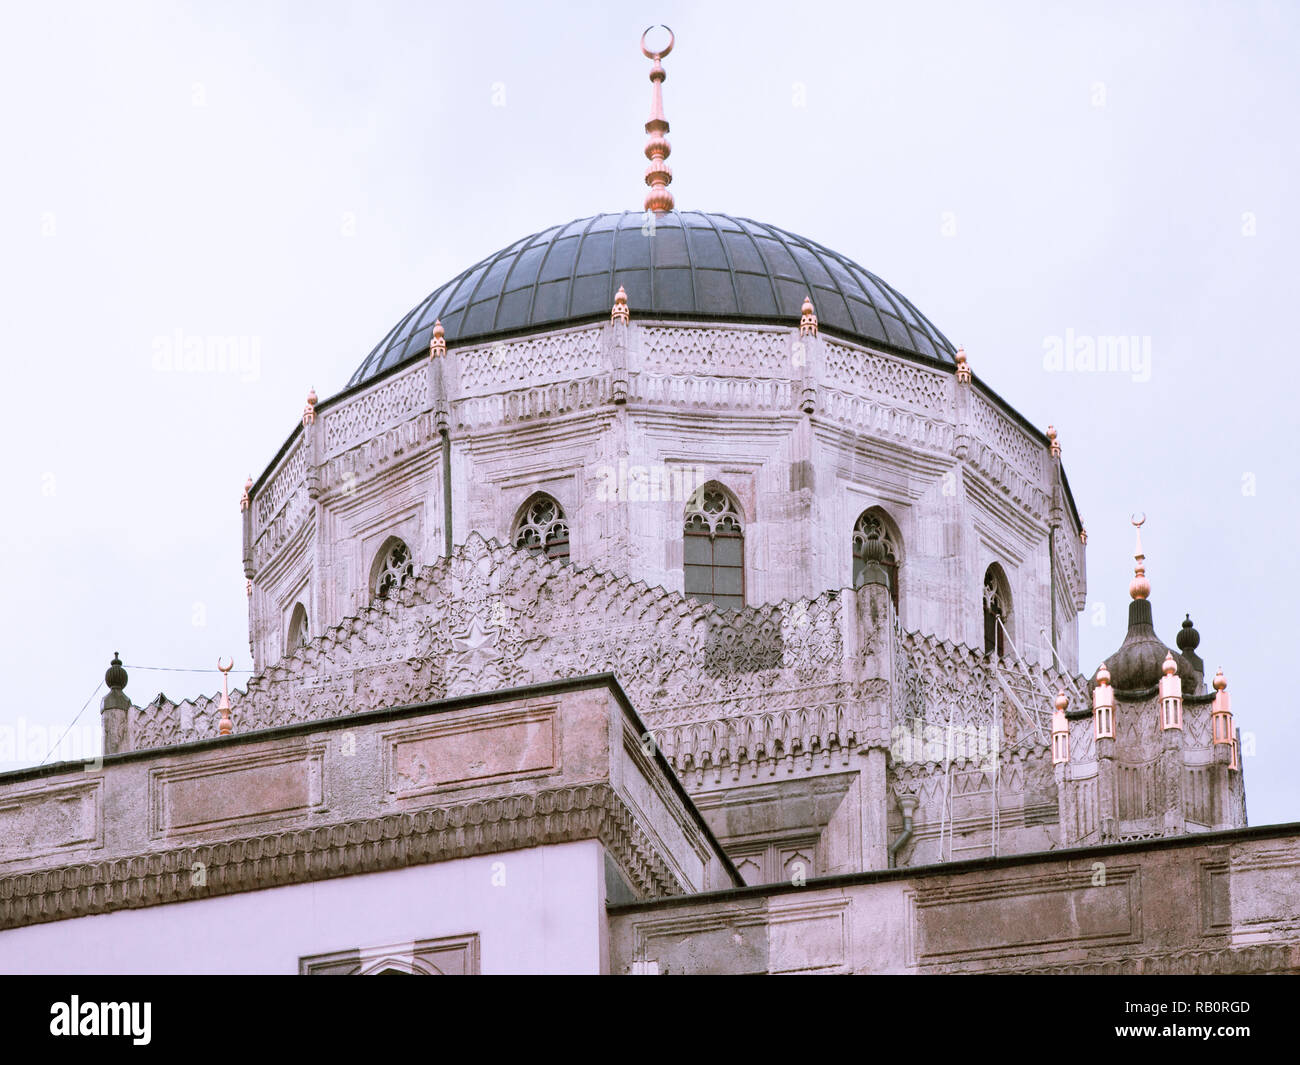 Exterior of the dome of the Aksaray Mosque, Laleli, Istanbul, Turkey Stock Photo